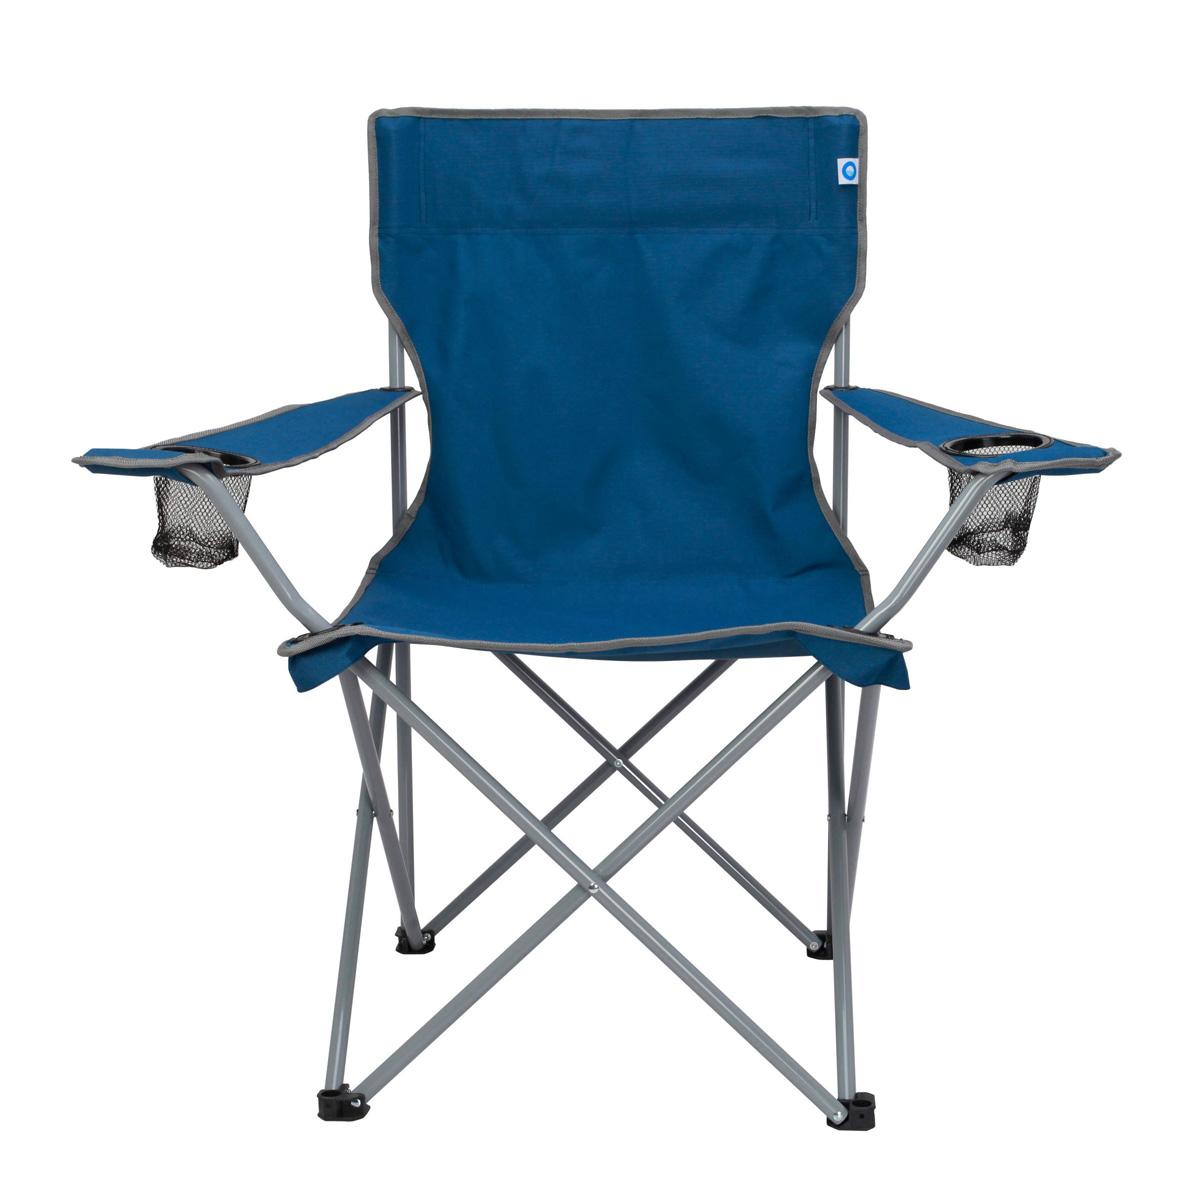 Ecotech Adult Quad Chair for $7.49